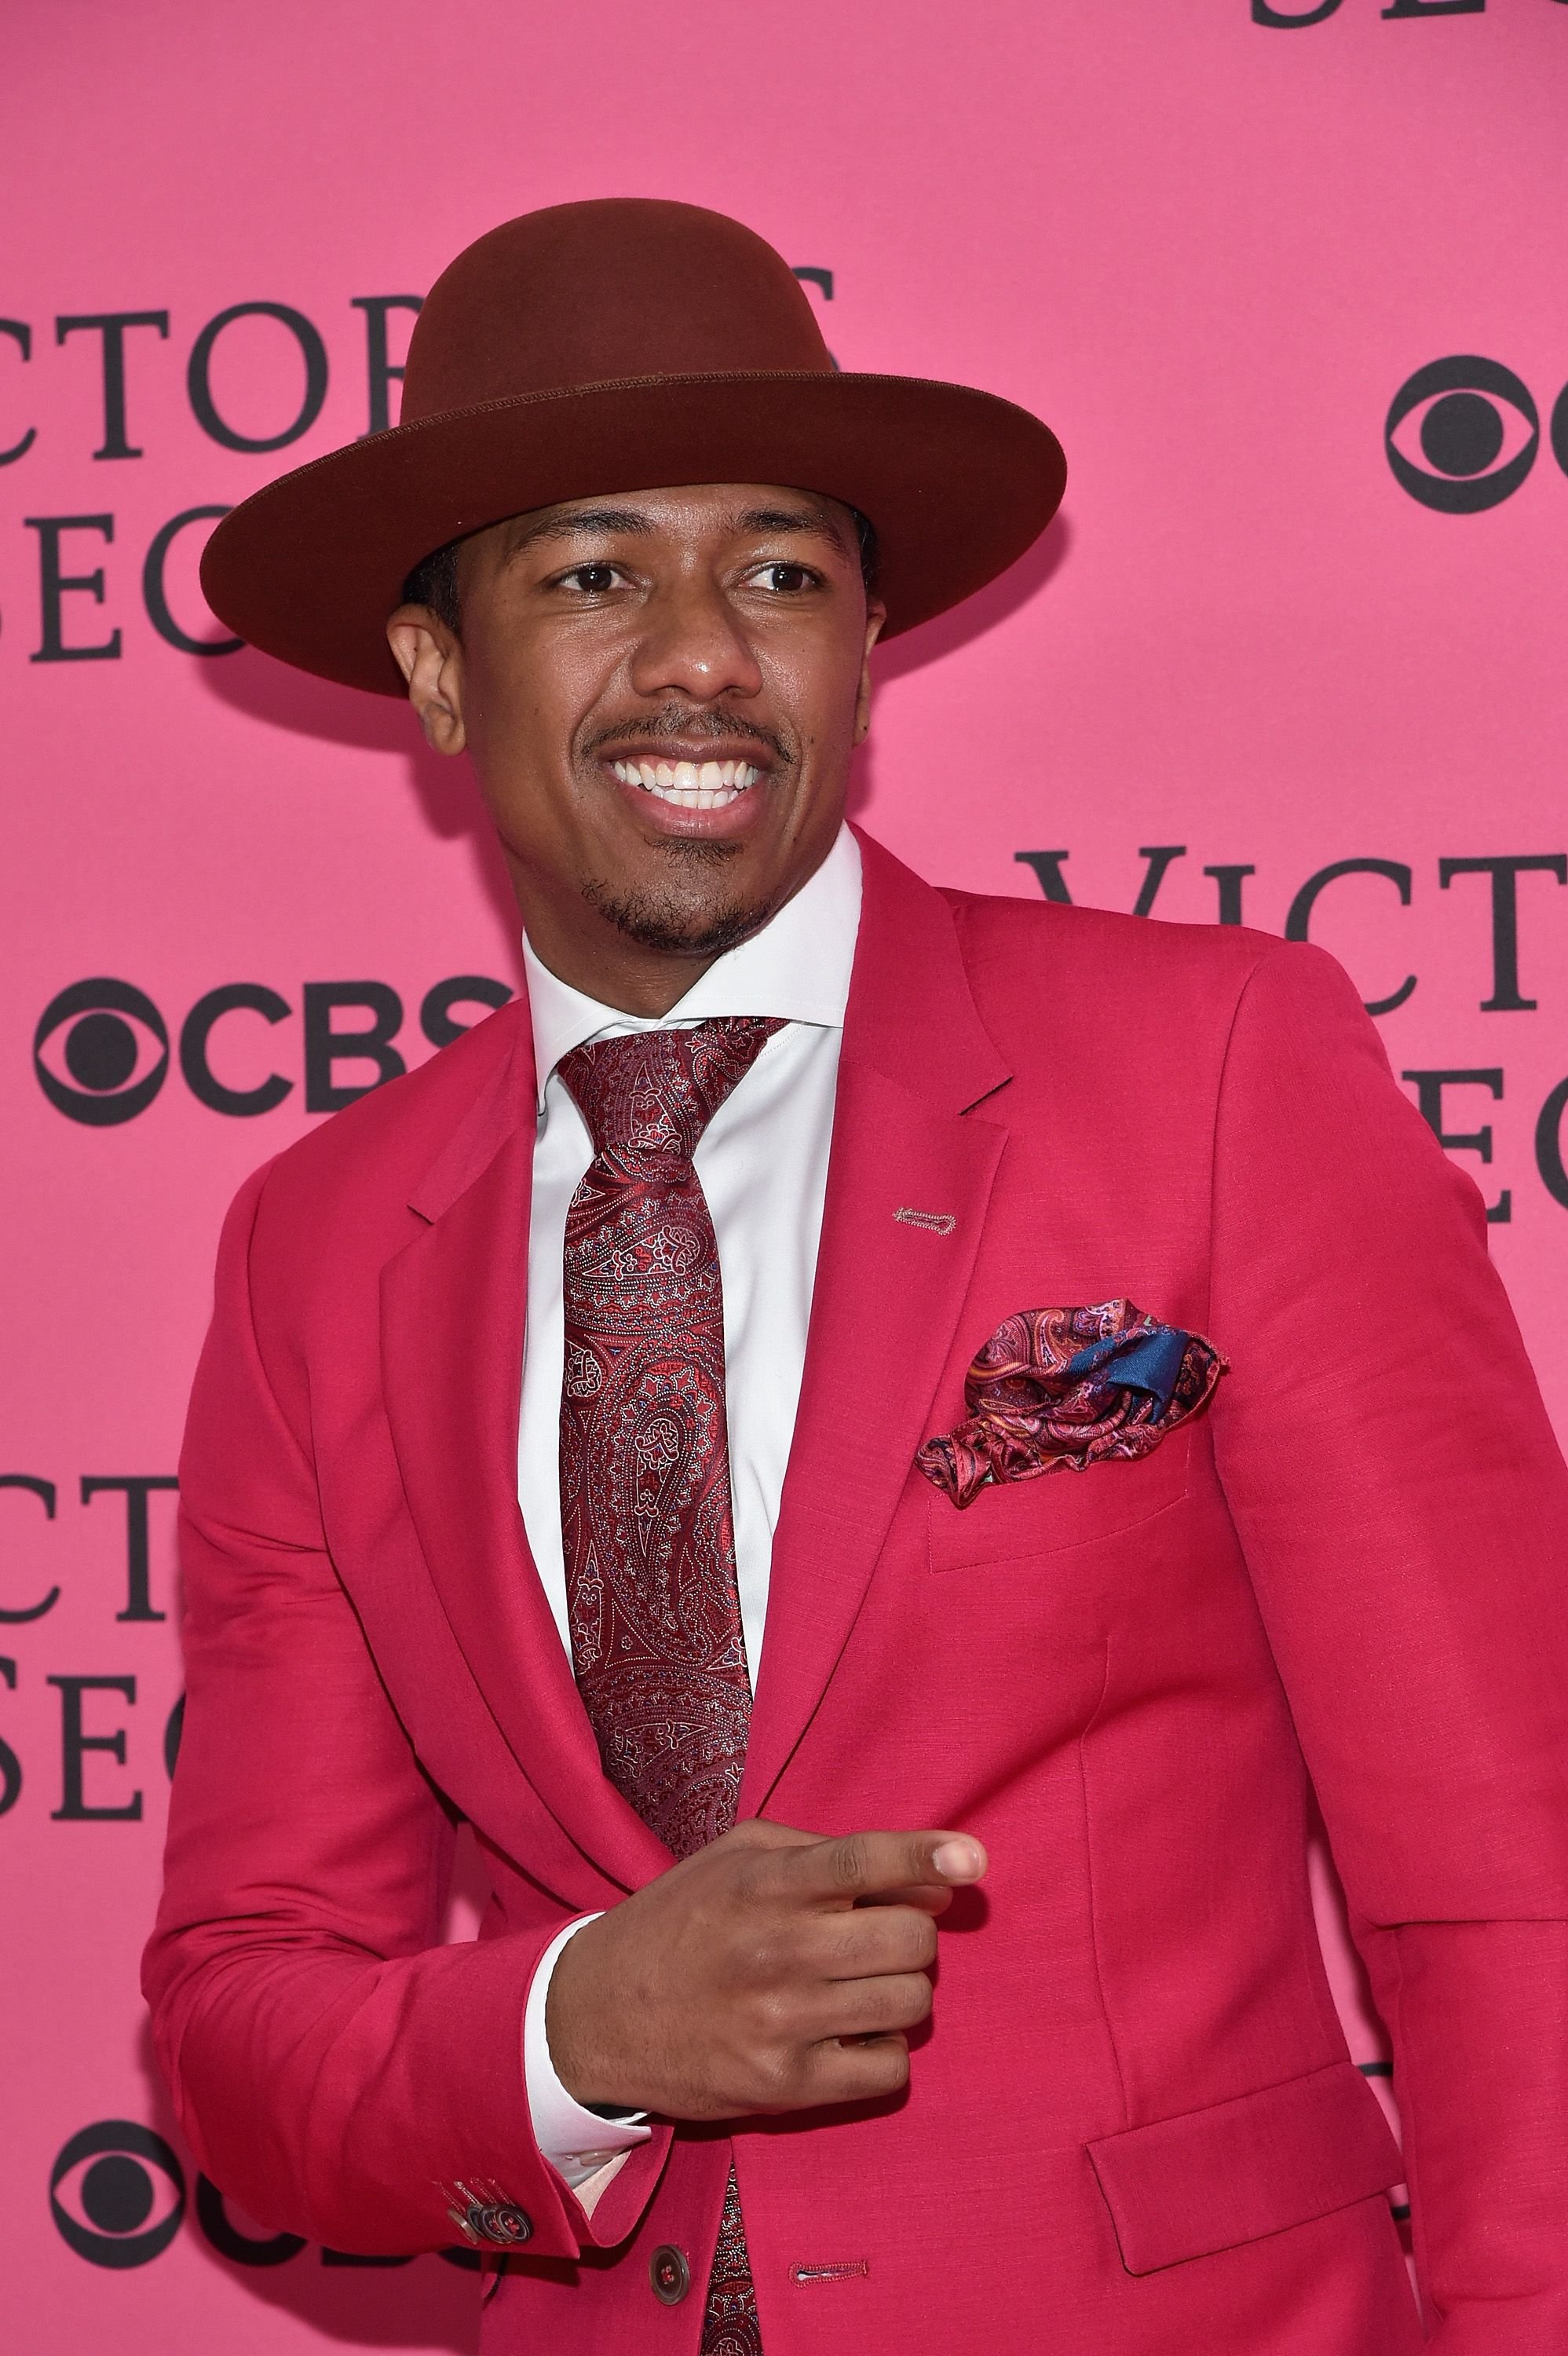 Nick Cannon at Victoria's Secret Fashion Show at Lexington Avenue Armory on November 10, 2015, in New York City | Photo: Mike Coppola/Getty Images